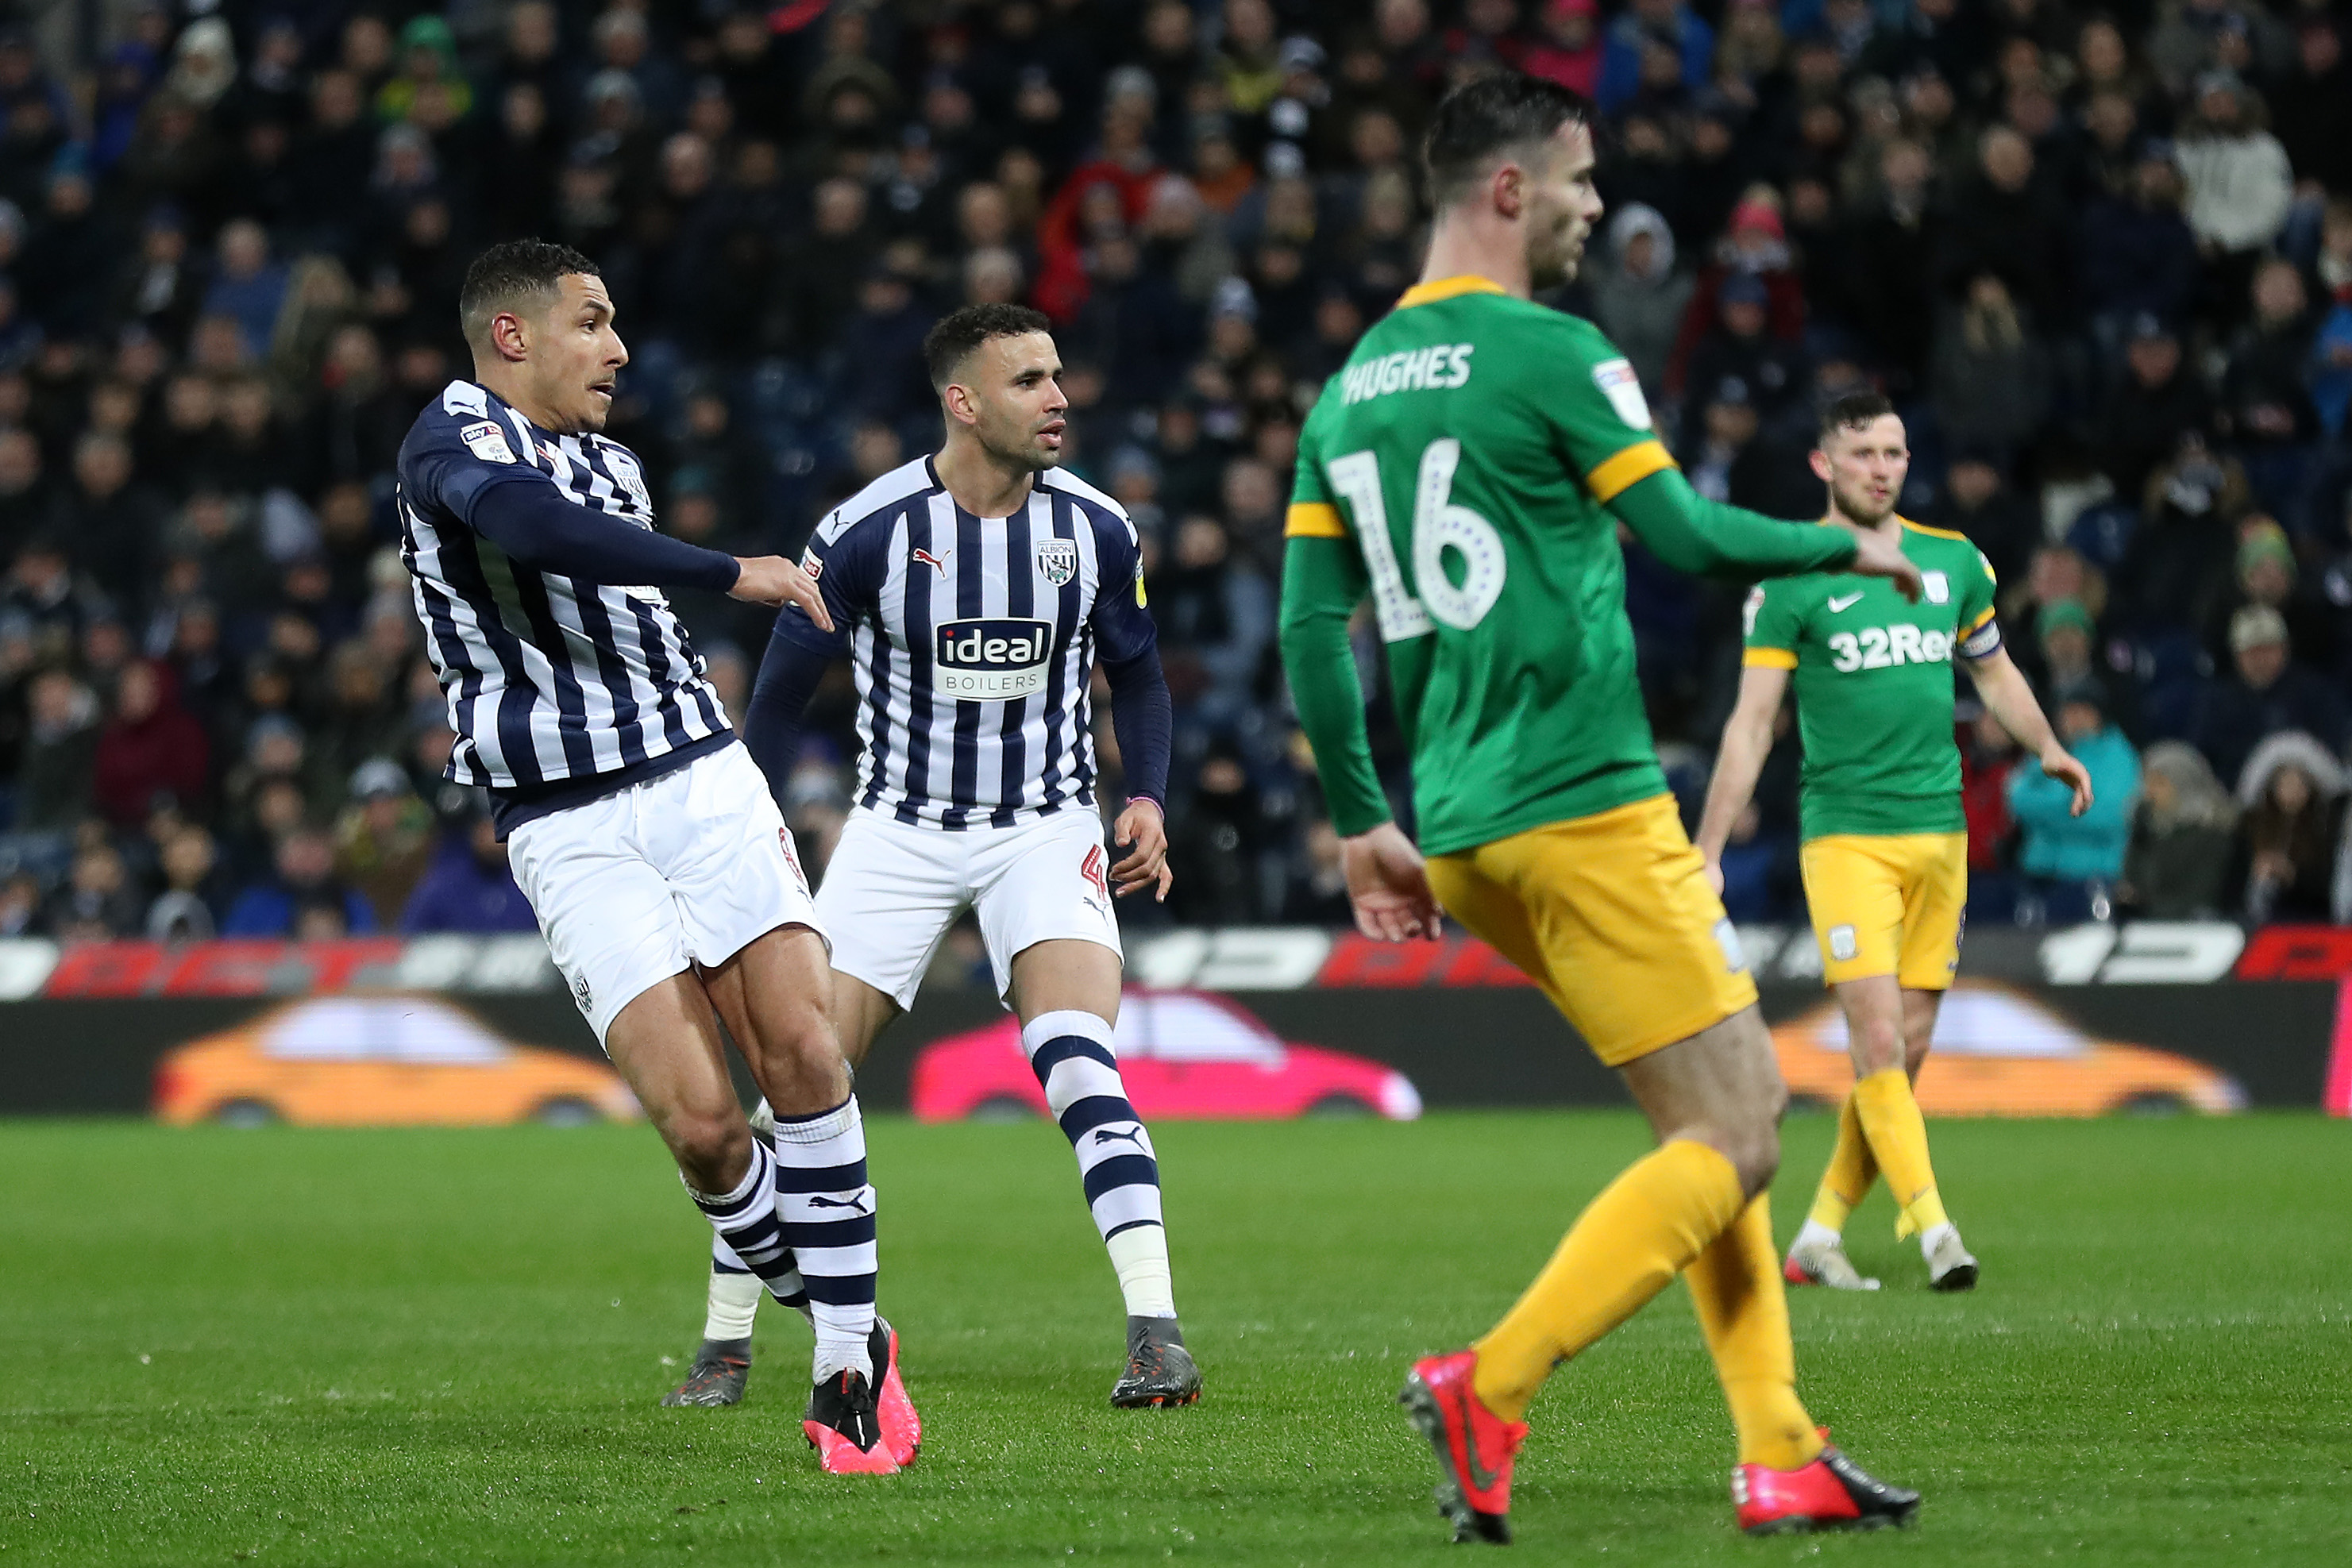 Jake Livermore scores against Preston North End at The Hawthorns in February 2020